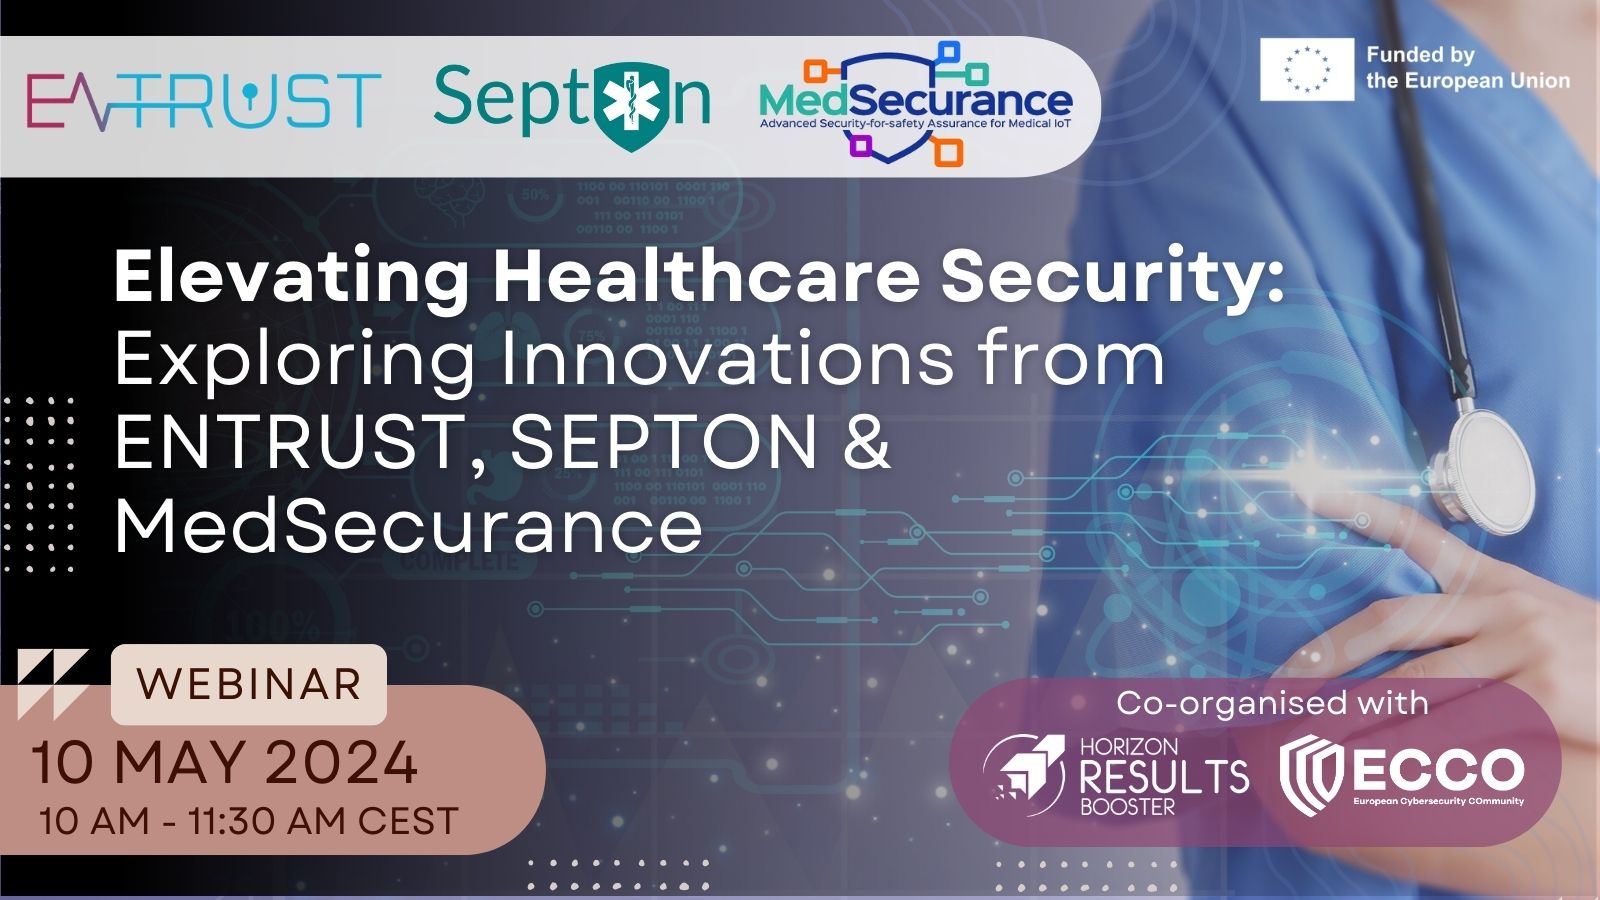  Elevating Healthcare Security: Exploring Innovations from ENTRUST, SEPTON & MEDSECURANCE